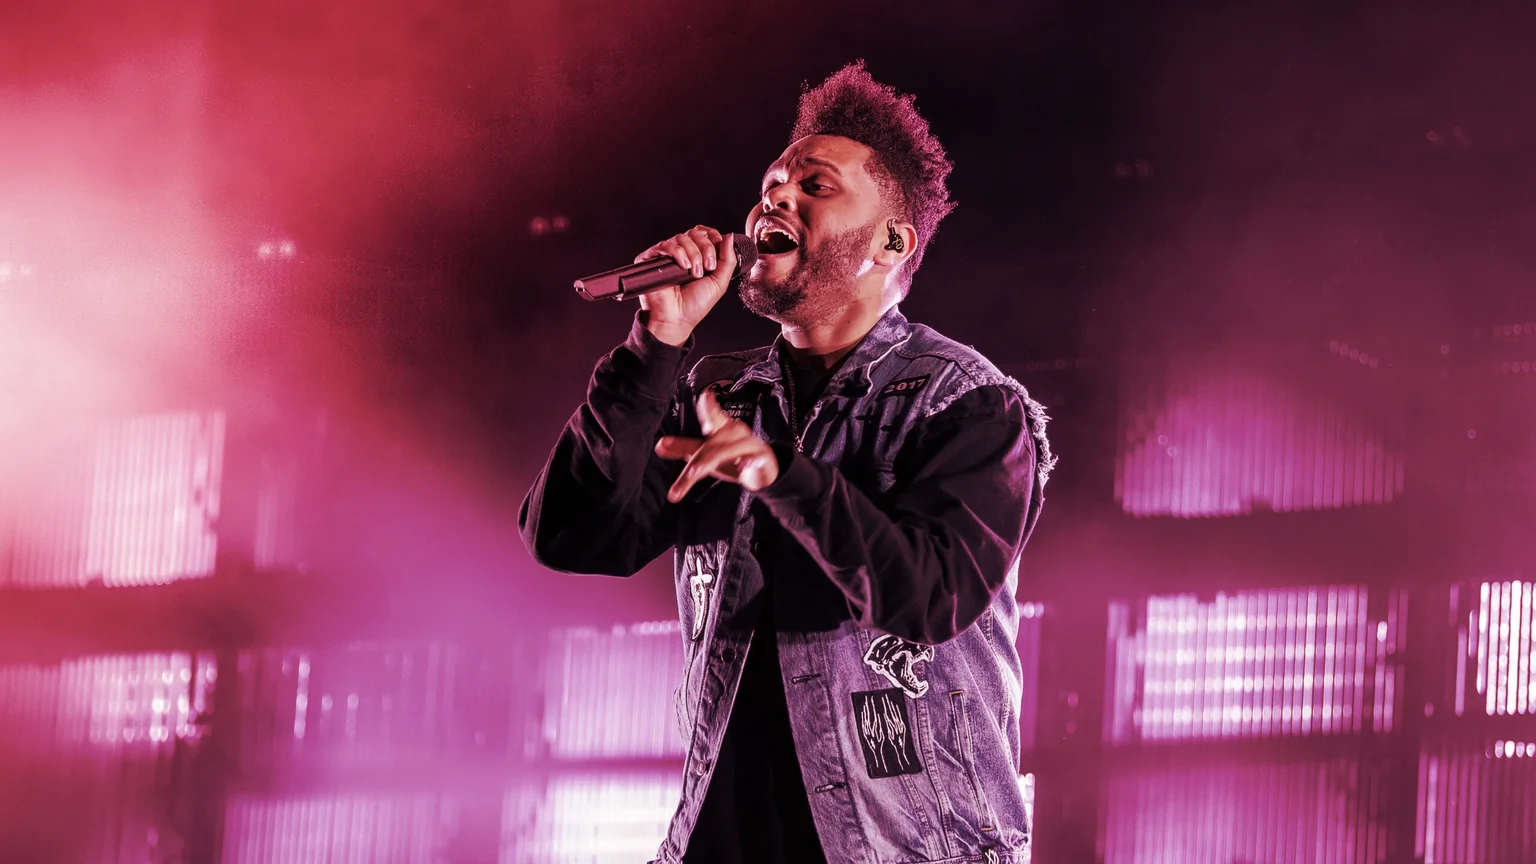 The Weeknd is a Canadian singer and songwriter. Image: Shutterstock